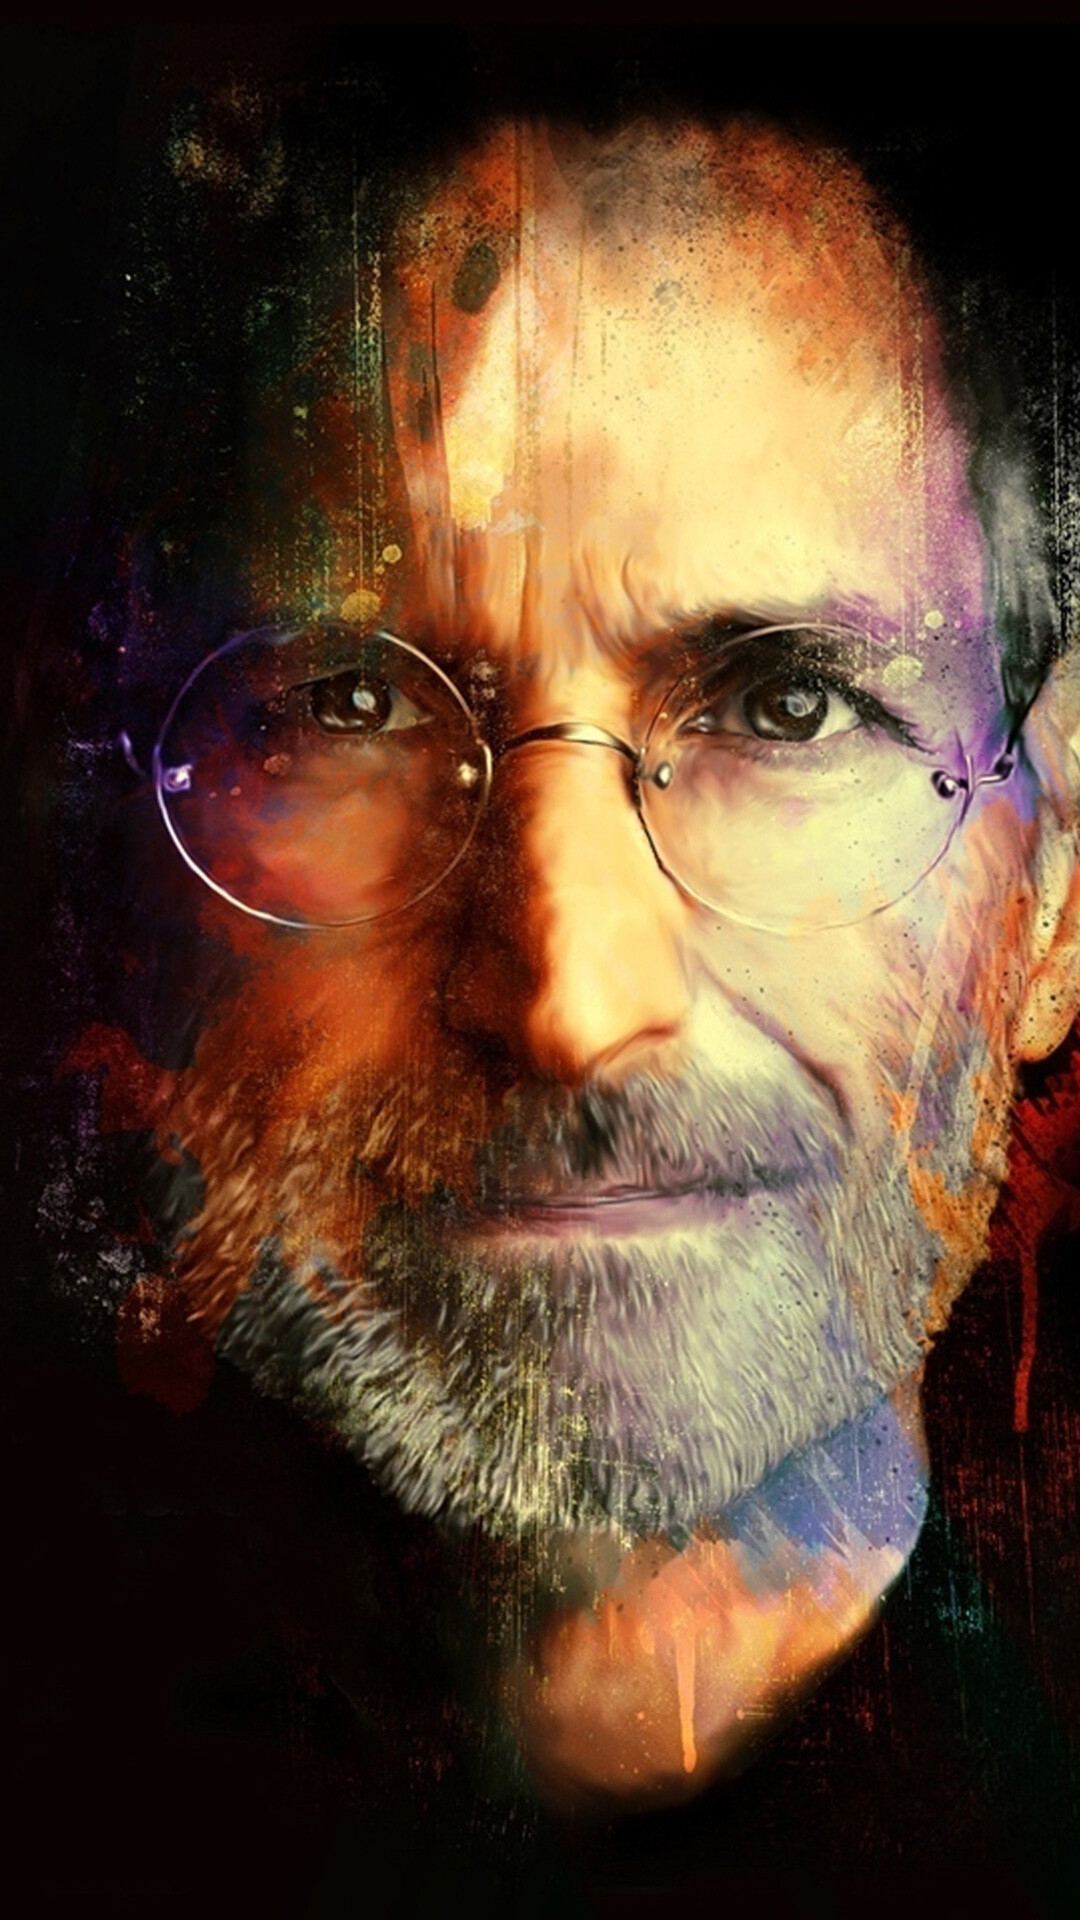 Steve Jobs: Renowned technology pioneer, The Apple co-founder. 1080x1920 Full HD Wallpaper.